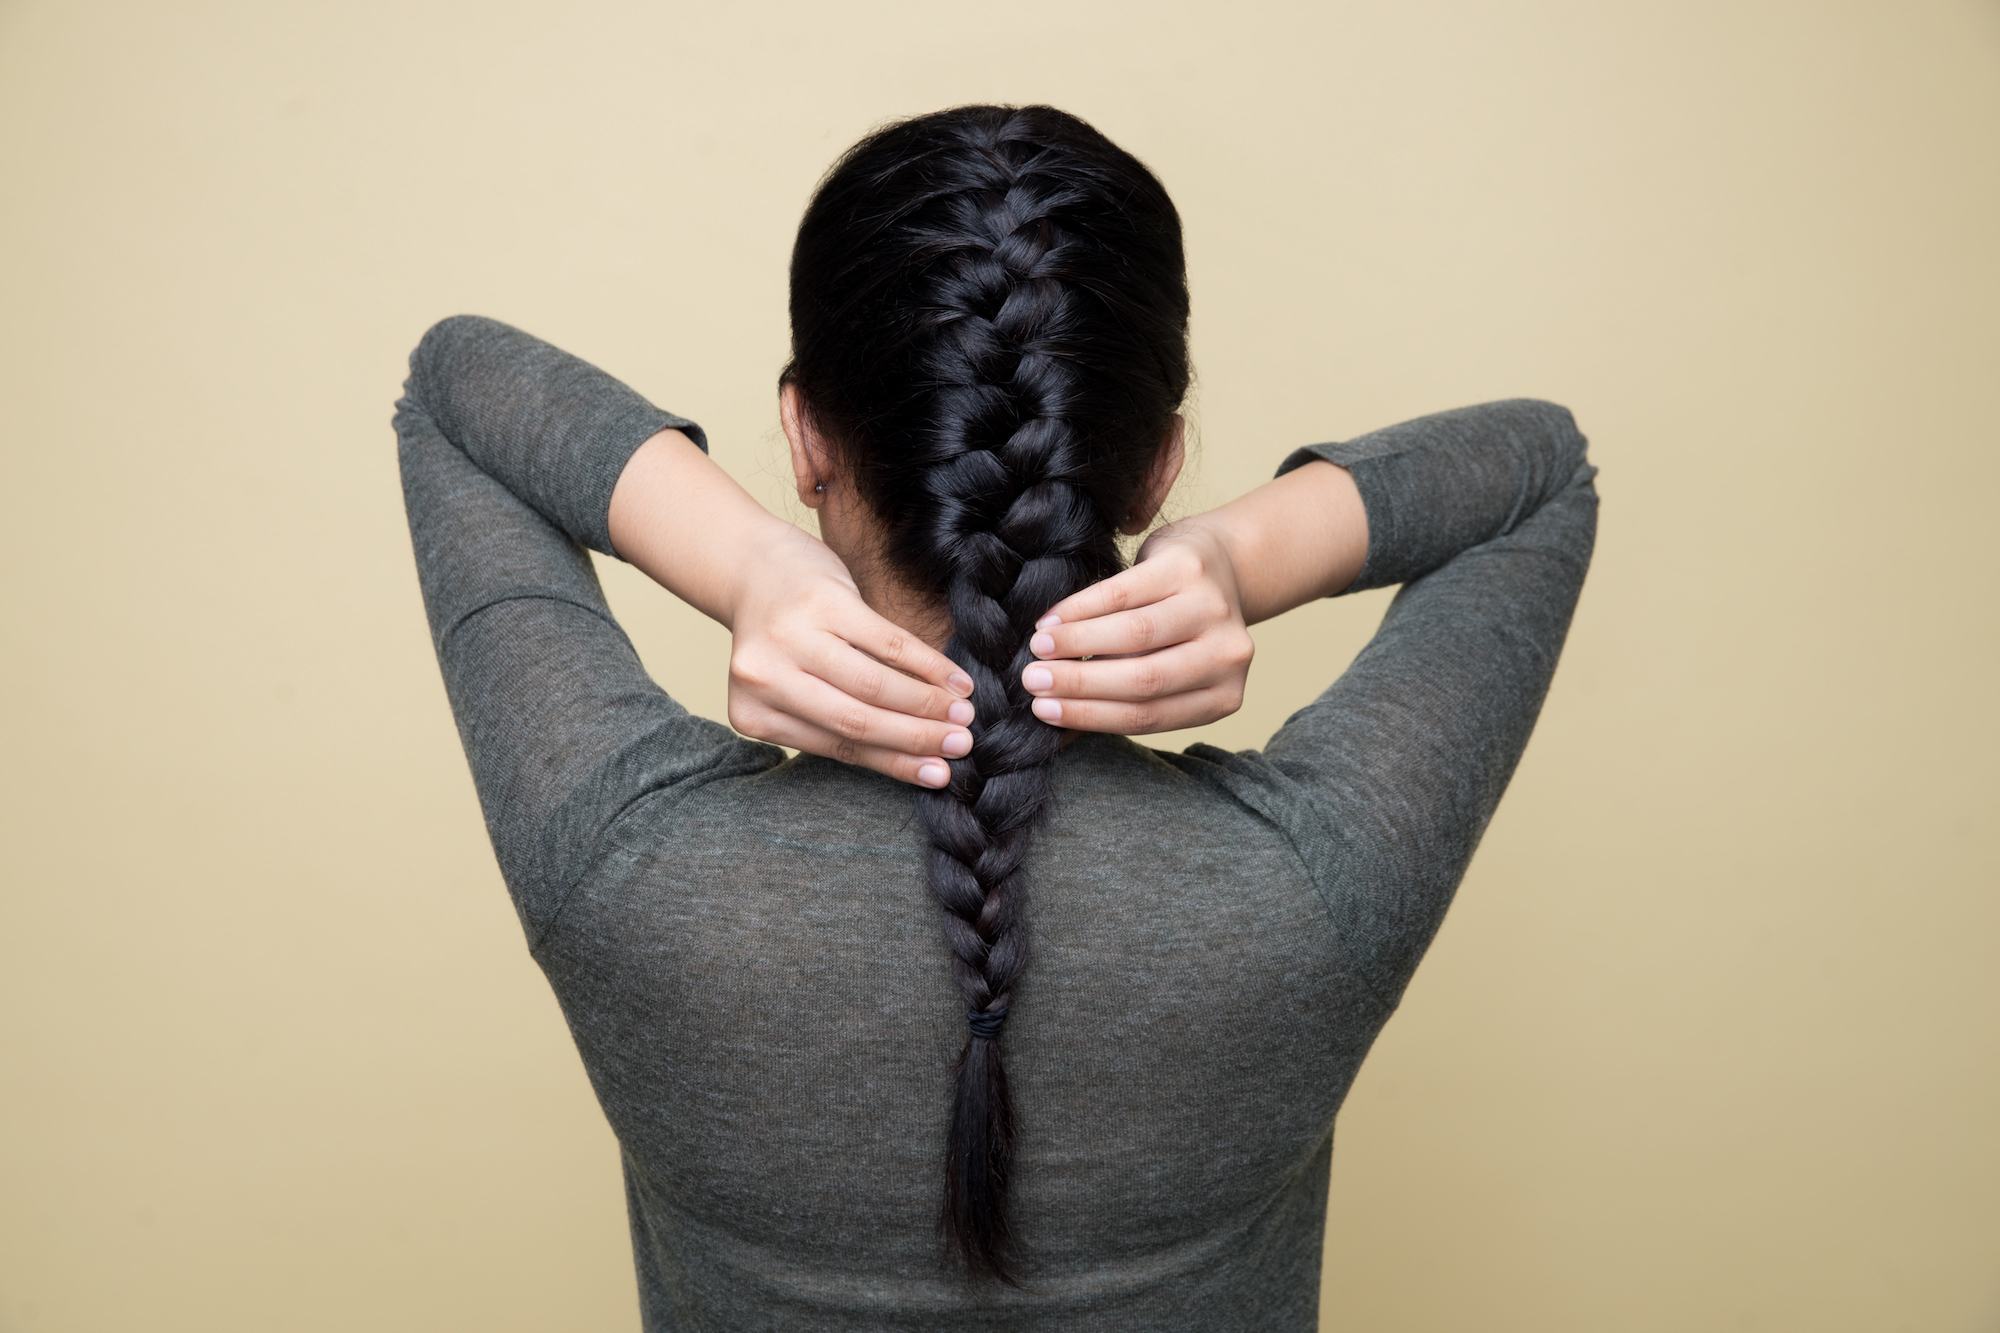 Braids 101: Basic Types You Need to Know